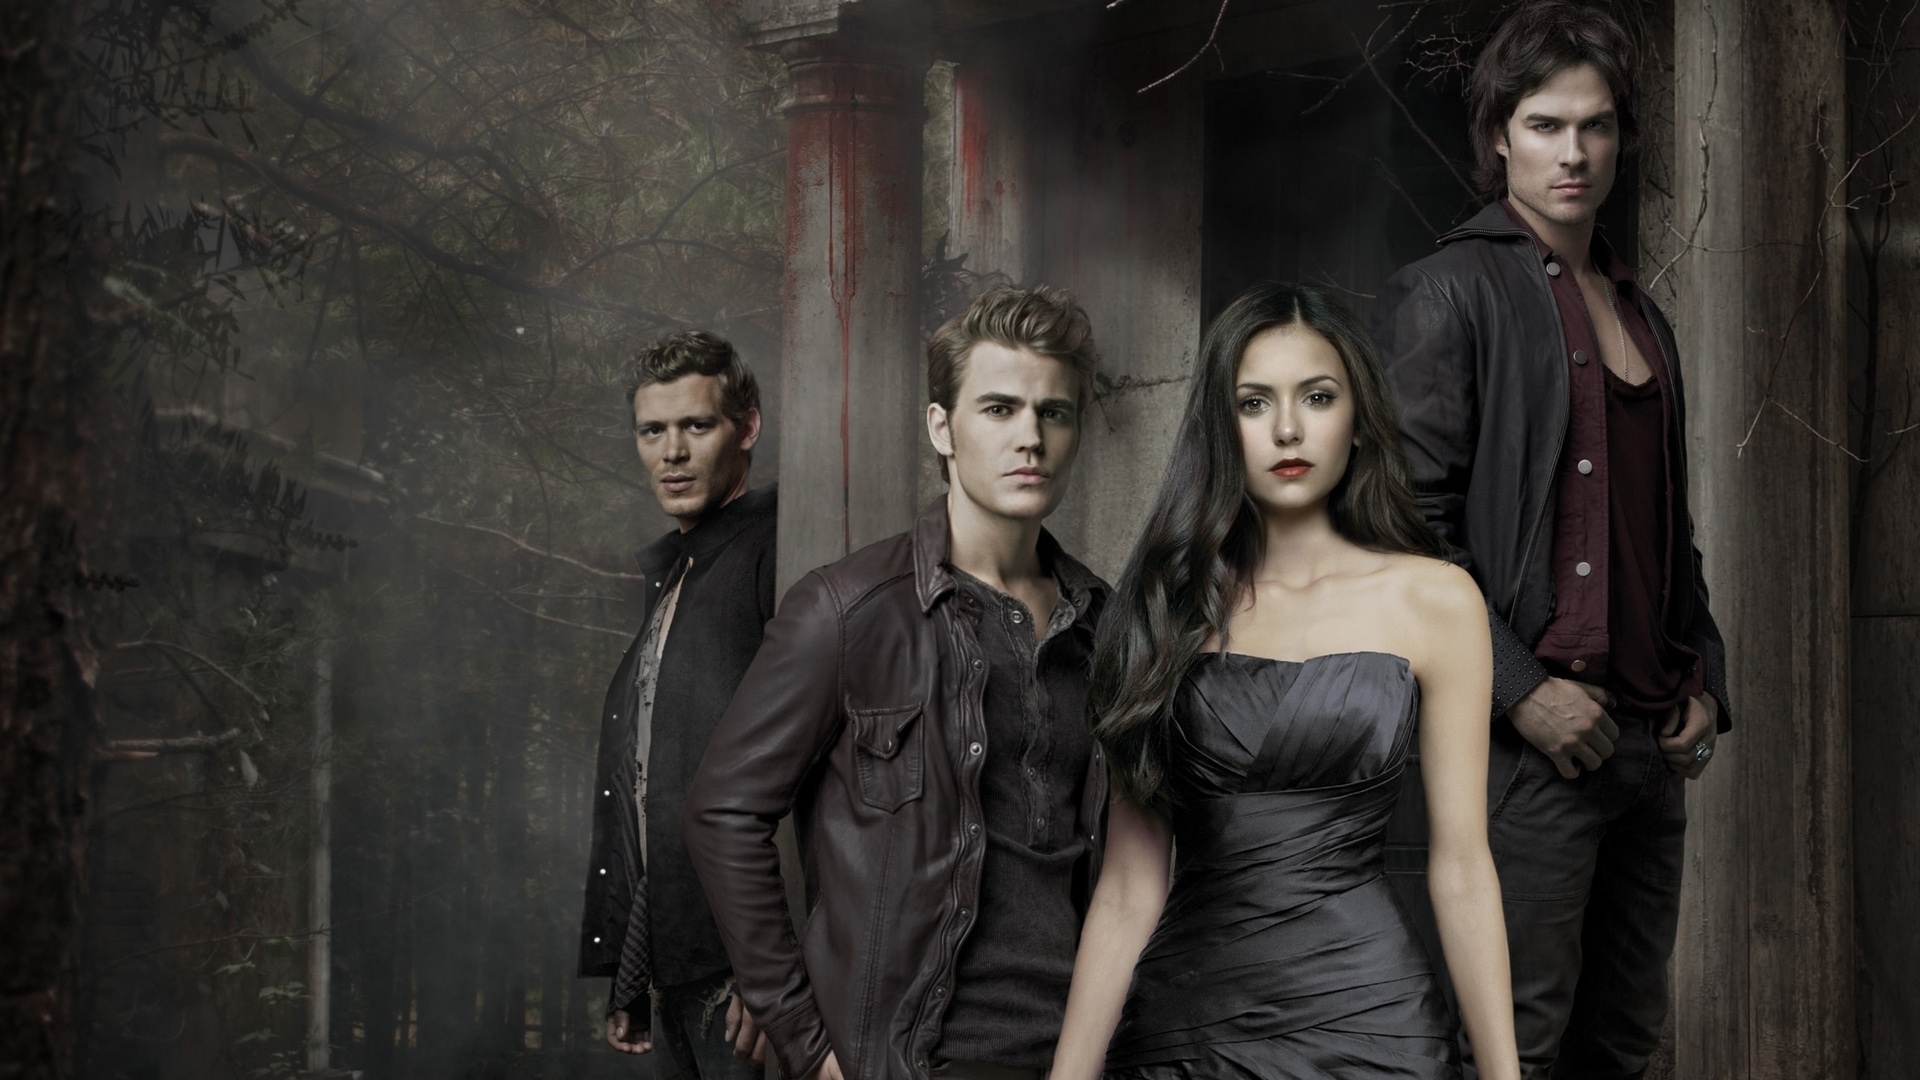 vampire diaries wallpaper,fashion,movie,photography,flash photography,fictional character